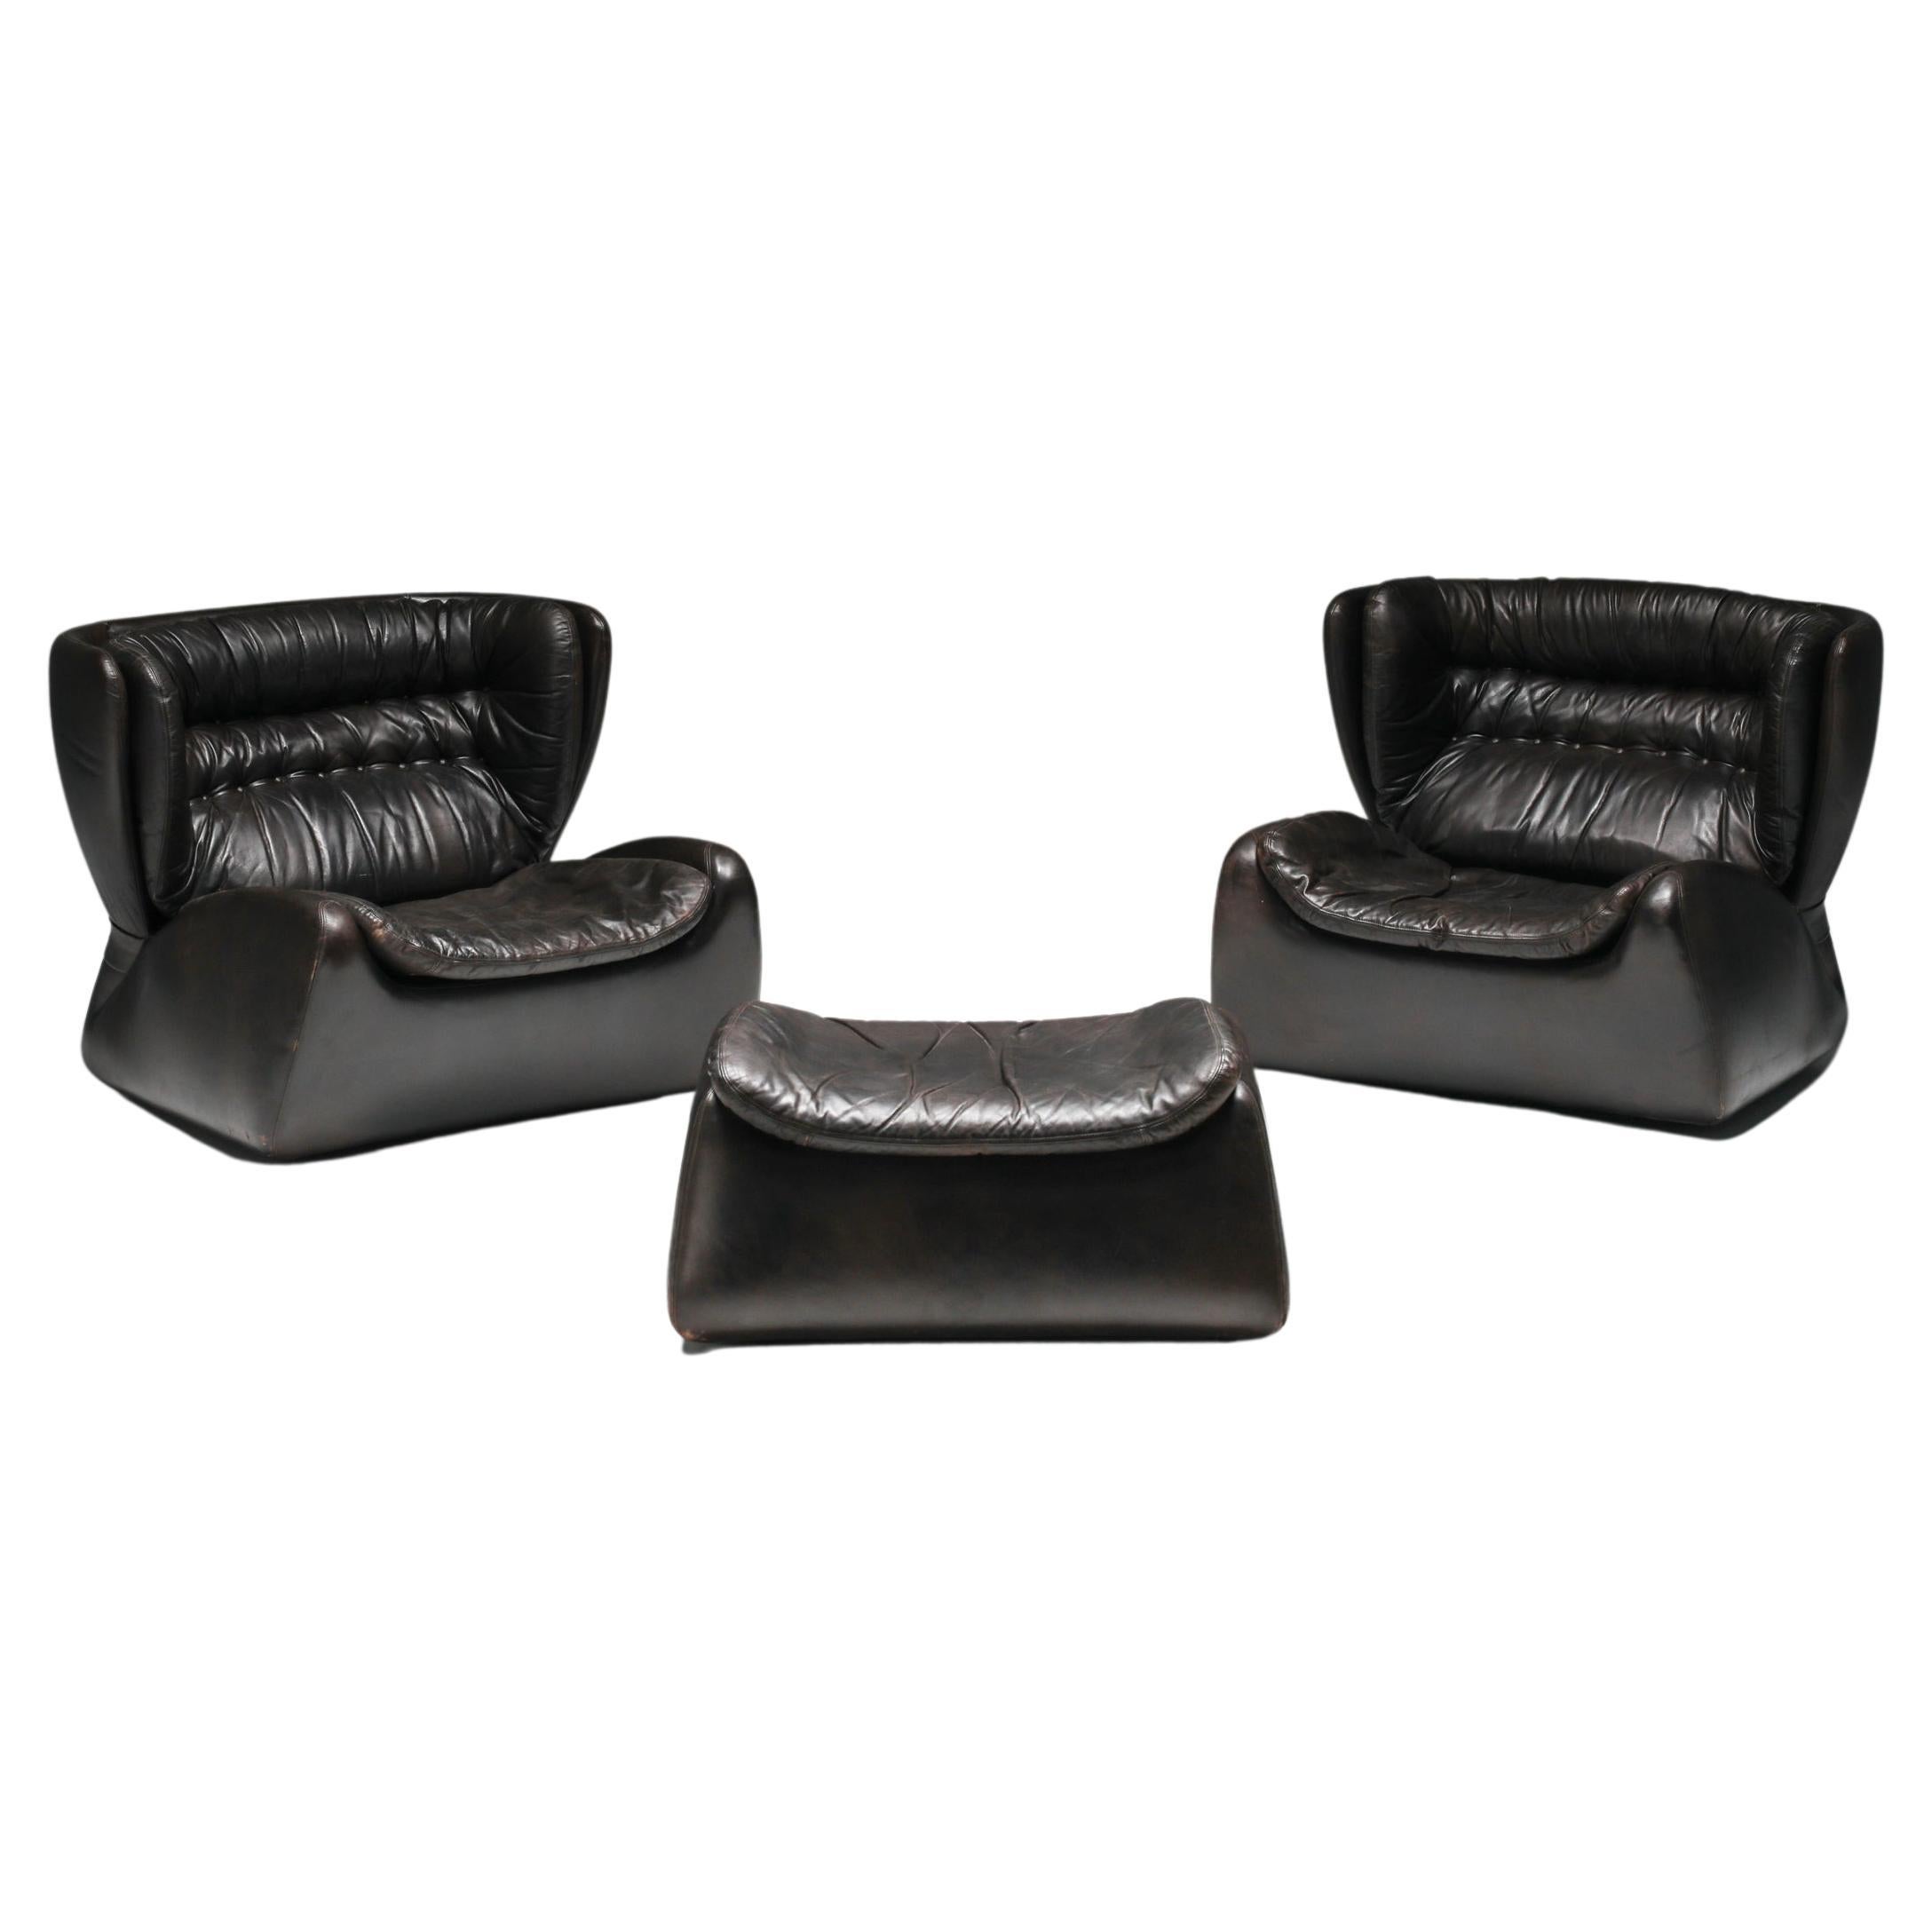 Belgian Design, Dark Brown 'Pasha' Lounge Chairs by Durlet, 1970's